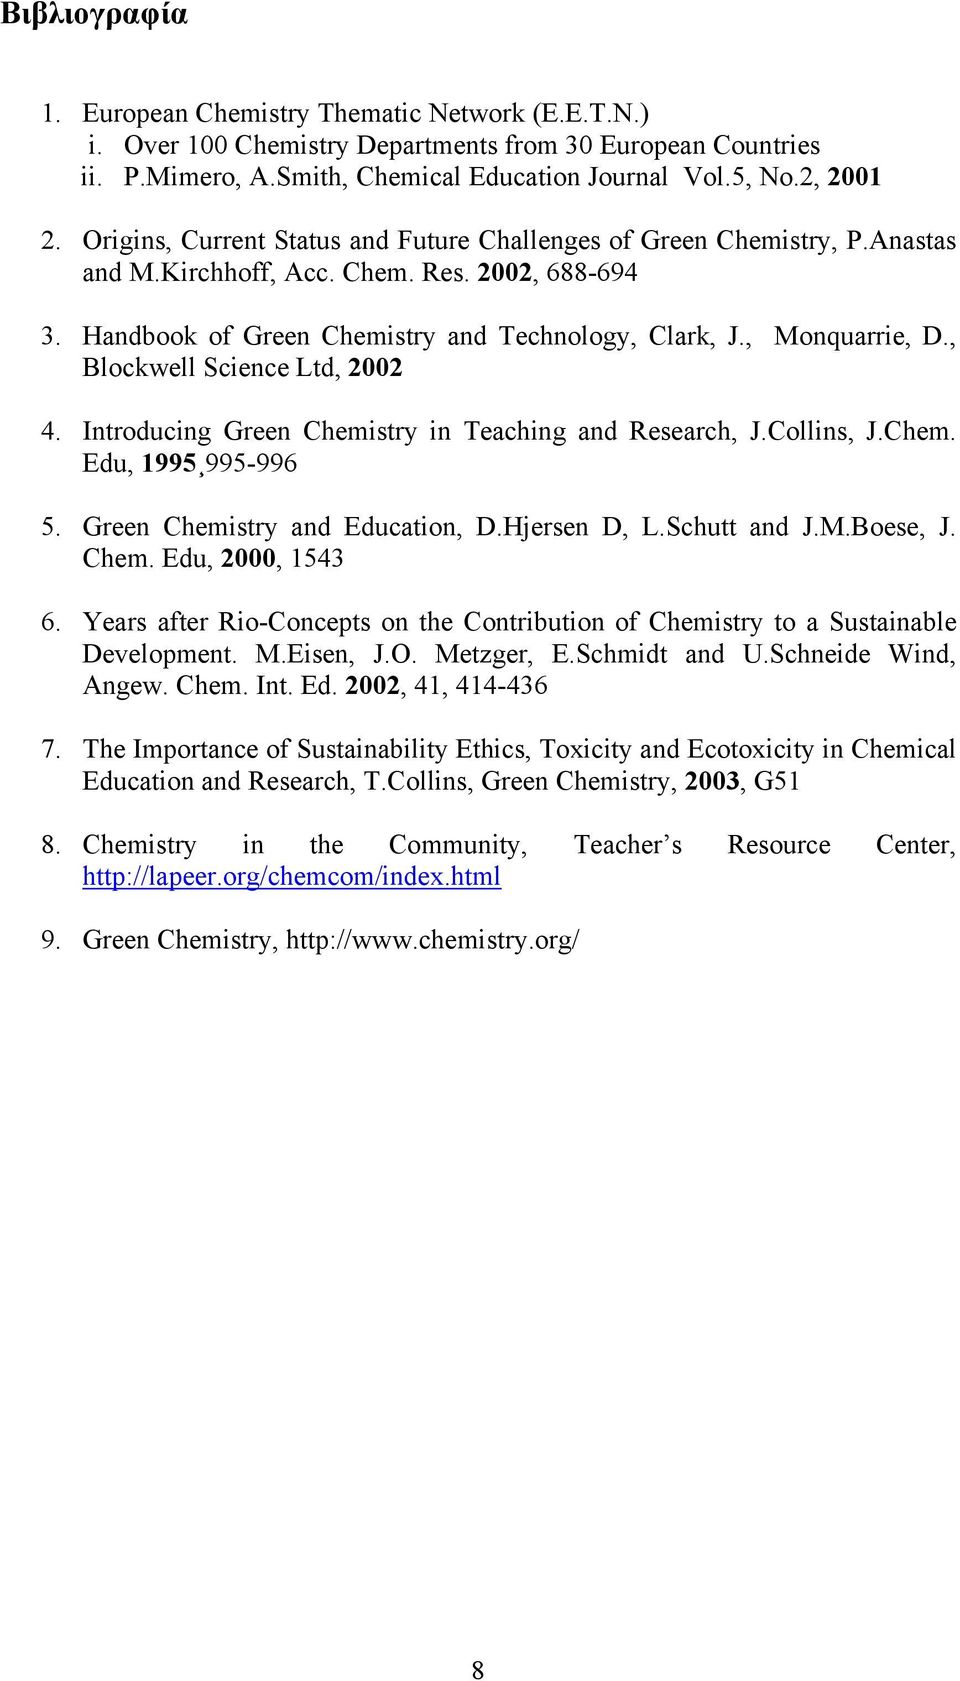 , Blockwell Science Ltd, 2002 4. Introducing Green Chemistry in Teaching and Research, J.Collins, J.Chem. Edu, 1995 995-996 5. Green Chemistry and Education, D.Hjersen D, L.Schutt and J.M.Boese, J.